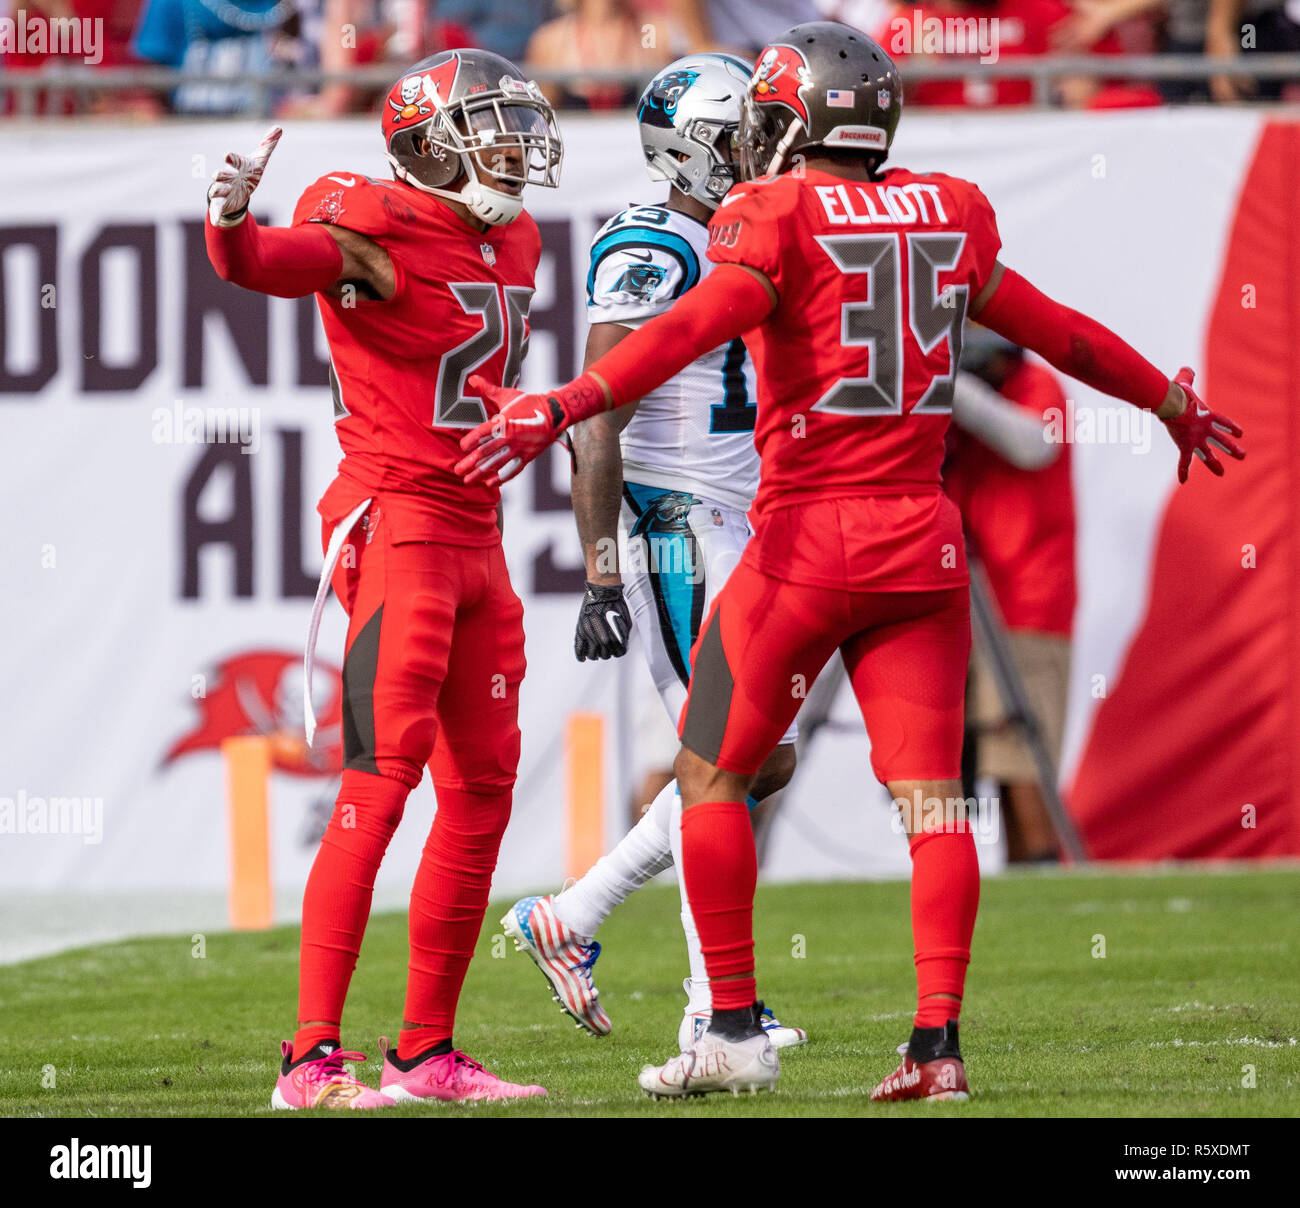 Tampa, Florida, USA. 02nd Dec, 2018. Tampa Bay Buccaneers defensive back Andrew Adams (26) makes his 3rd interception of the game and celebrates with Tampa Bay Buccaneers cornerback Javien Elliott (35) in the 4th quarter during the game between the Carolina Panthers and the Tampa Bay Buccaneers at Raymond James Stadium in Tampa, Florida. Del Mecum/CSM/Alamy Live News Stock Photo